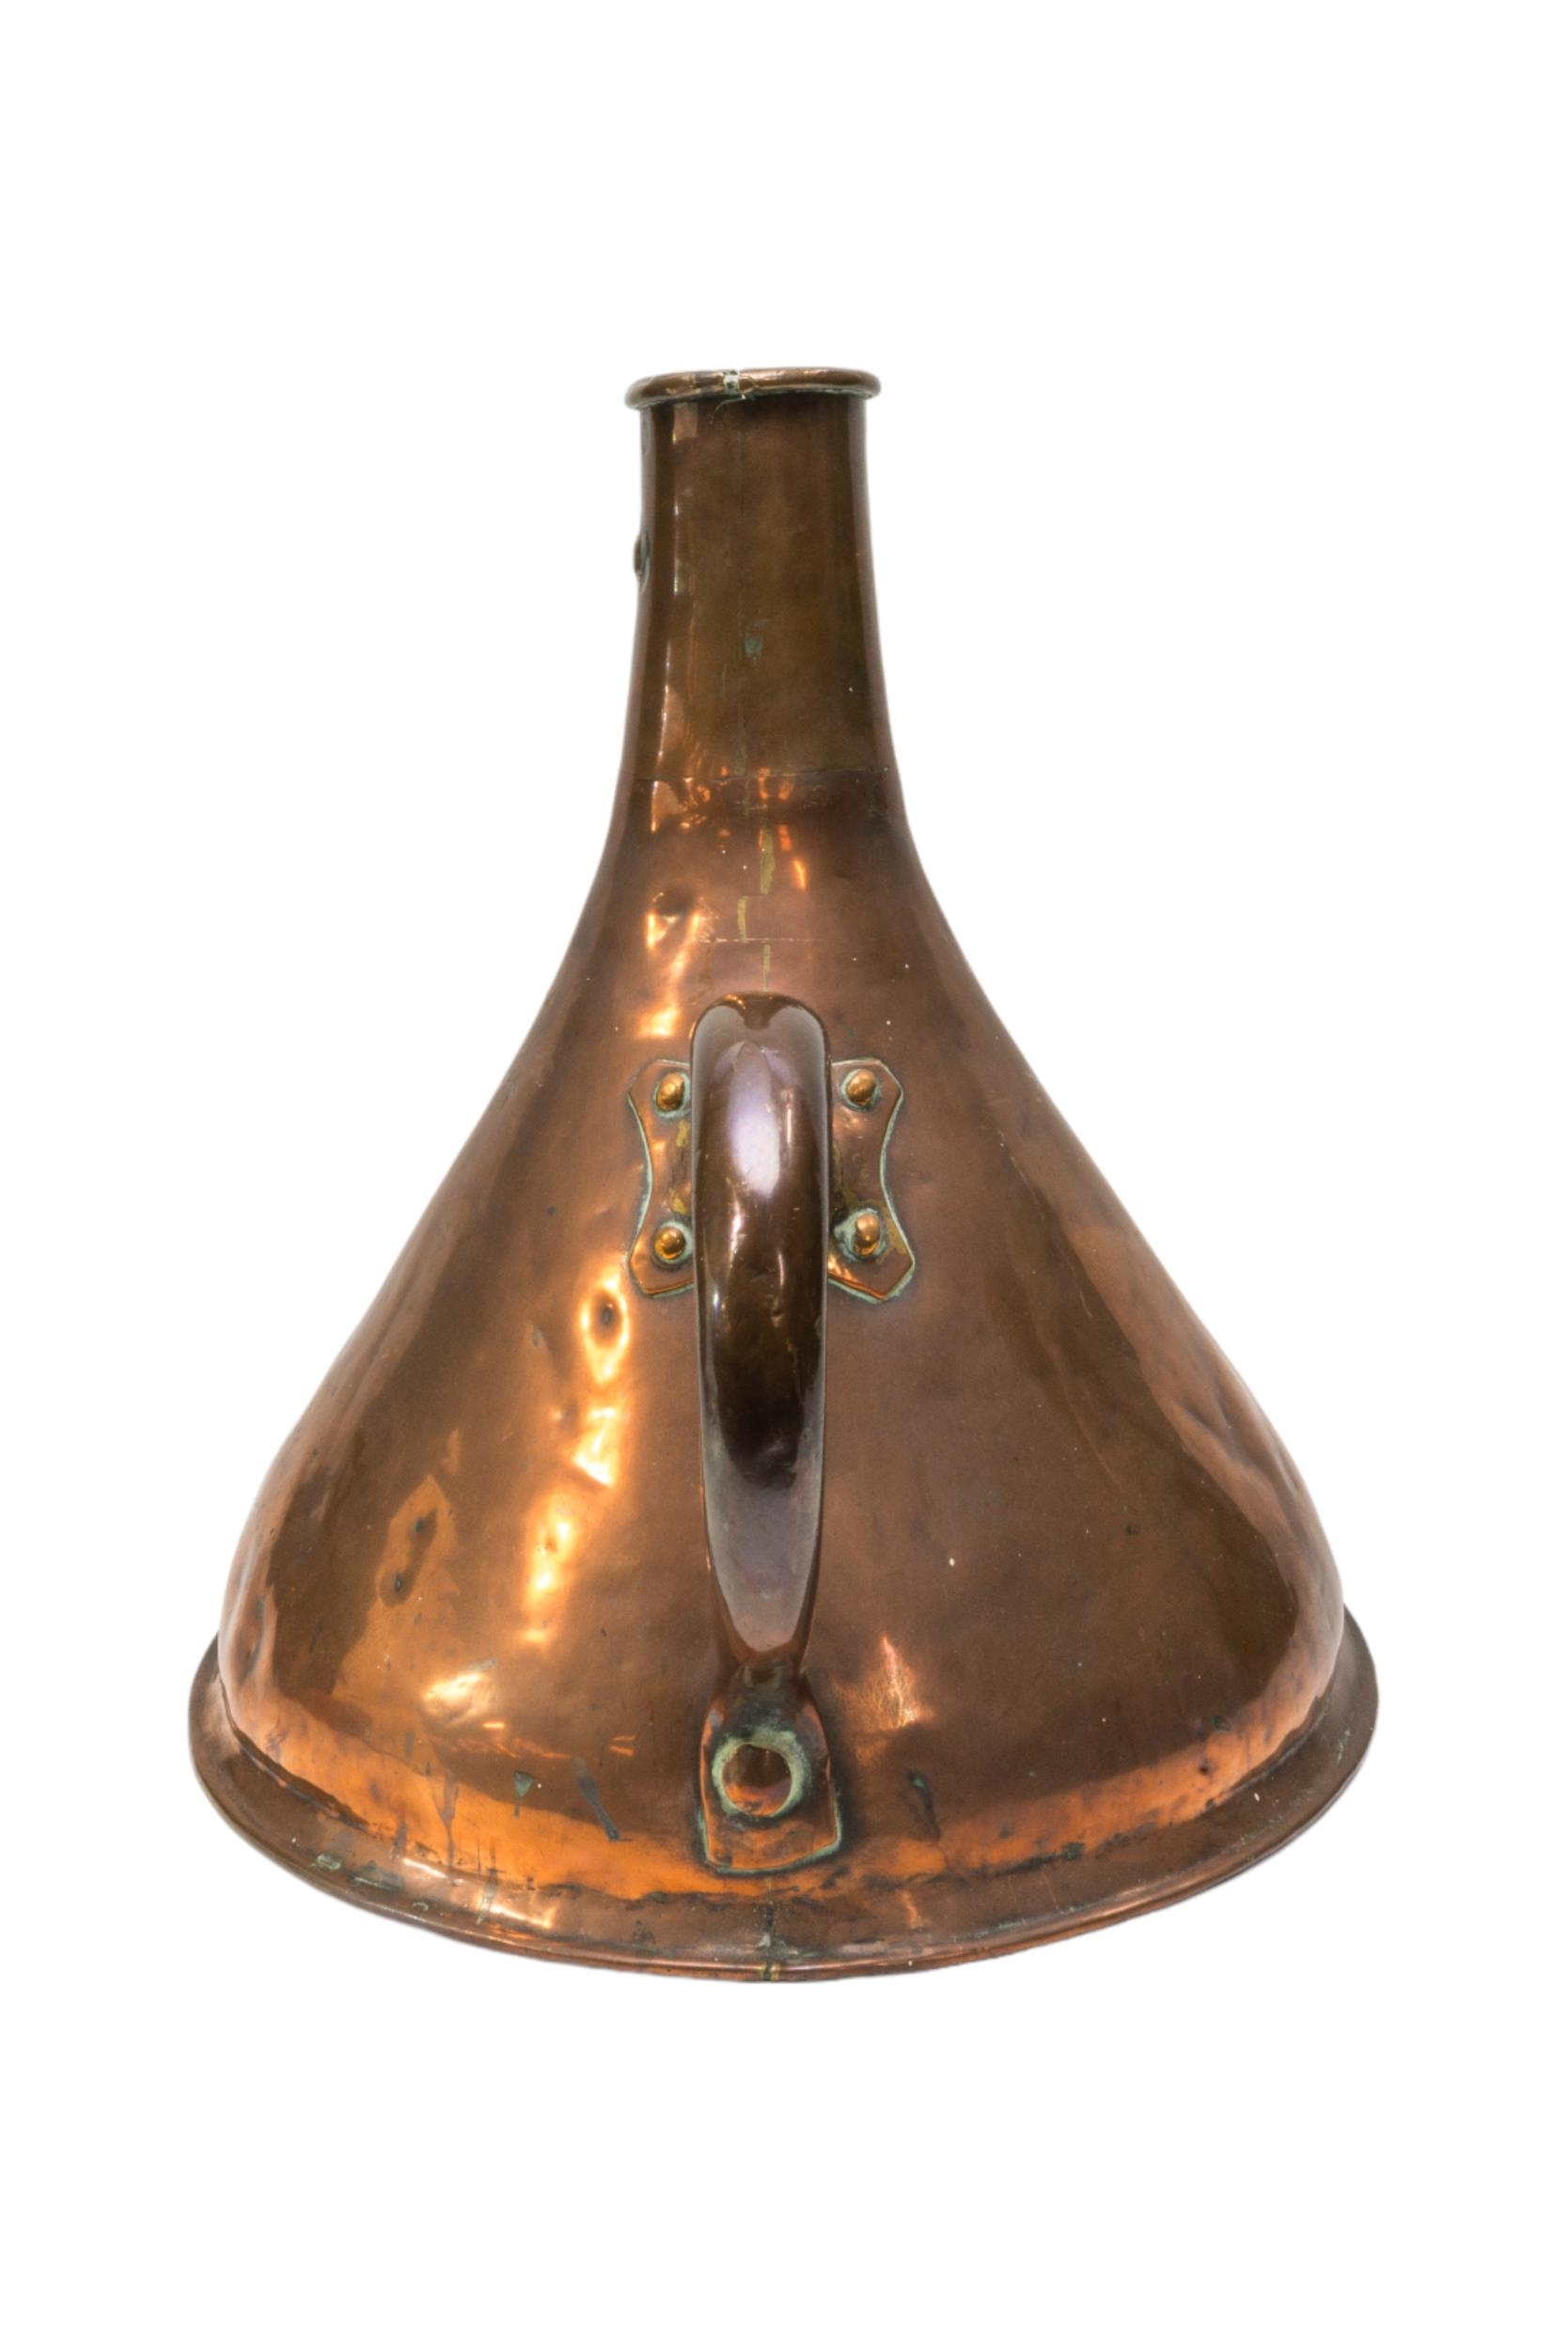 A LARGE COPPER MEASURE with narrow neck, loop handle and GR weights and measures stamp. 40 cms high.